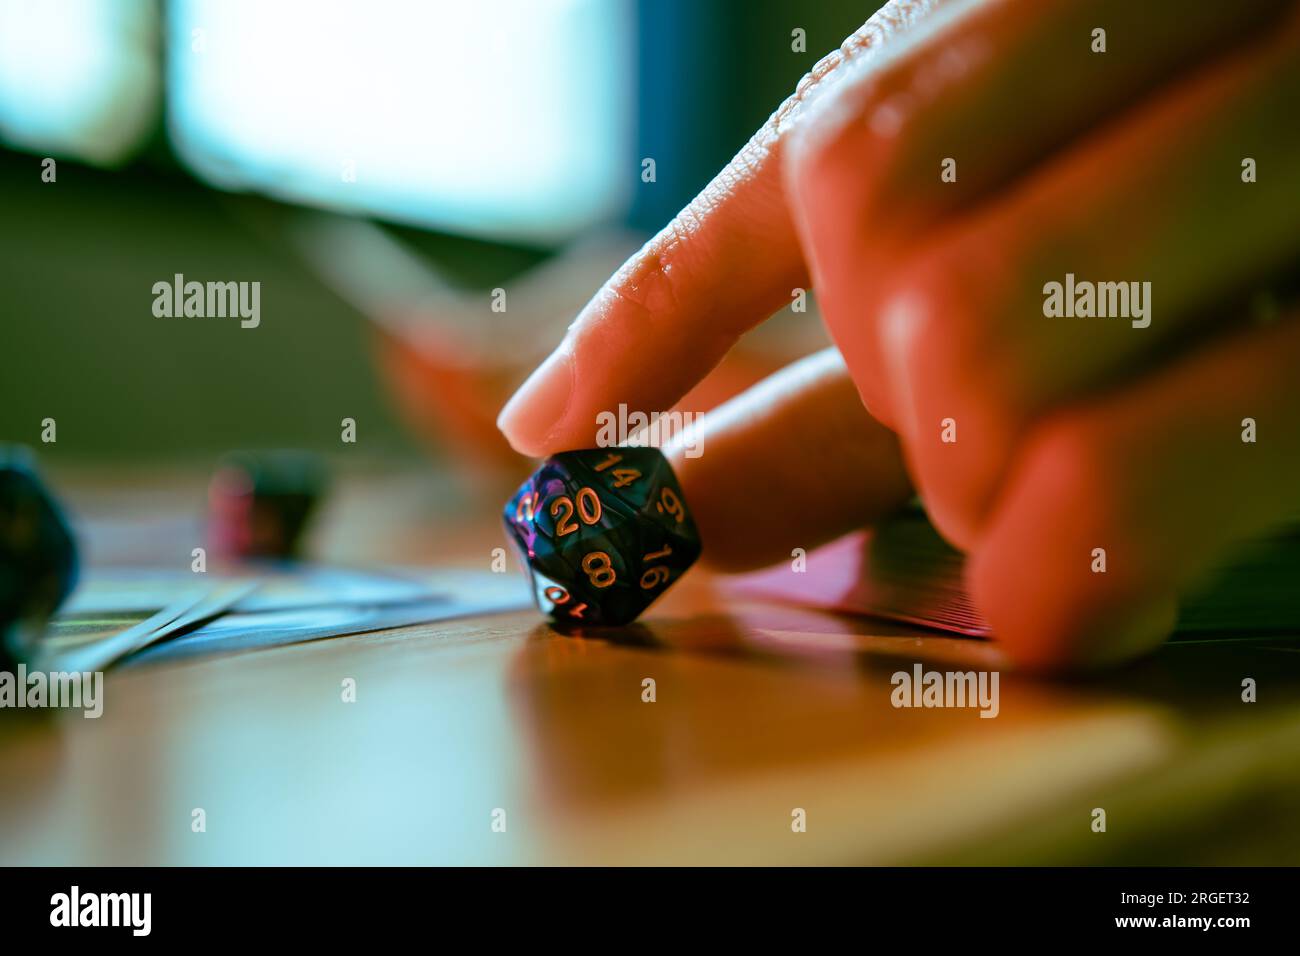 Using d20 dice as a life counter when playing trading card game Stock Photo